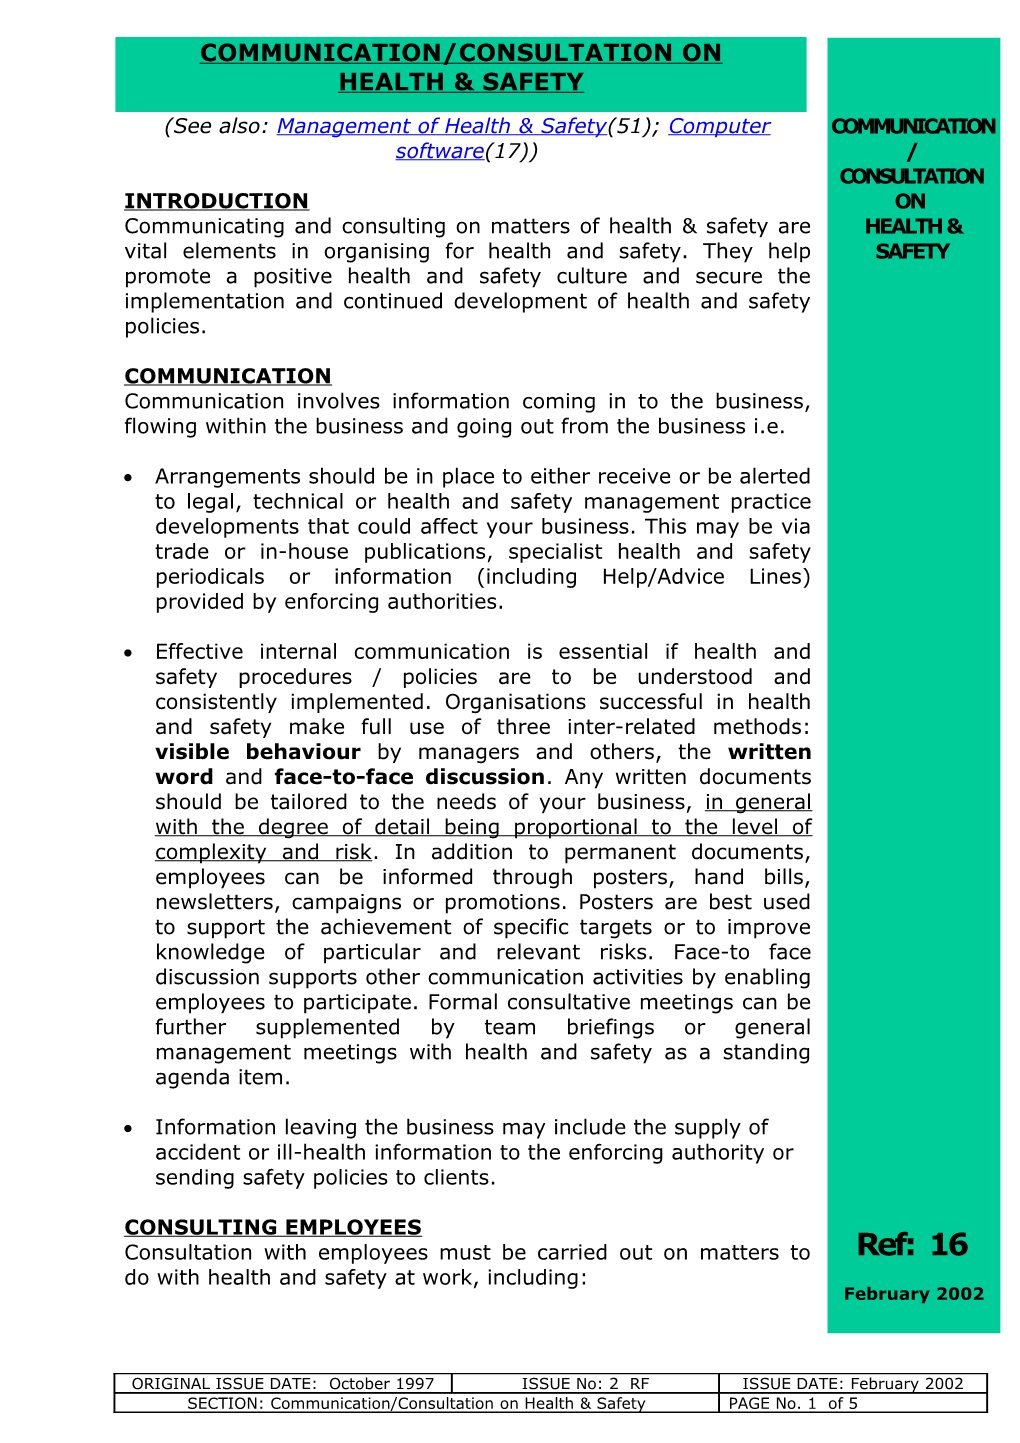 Communication/Consultation On Health & Safety